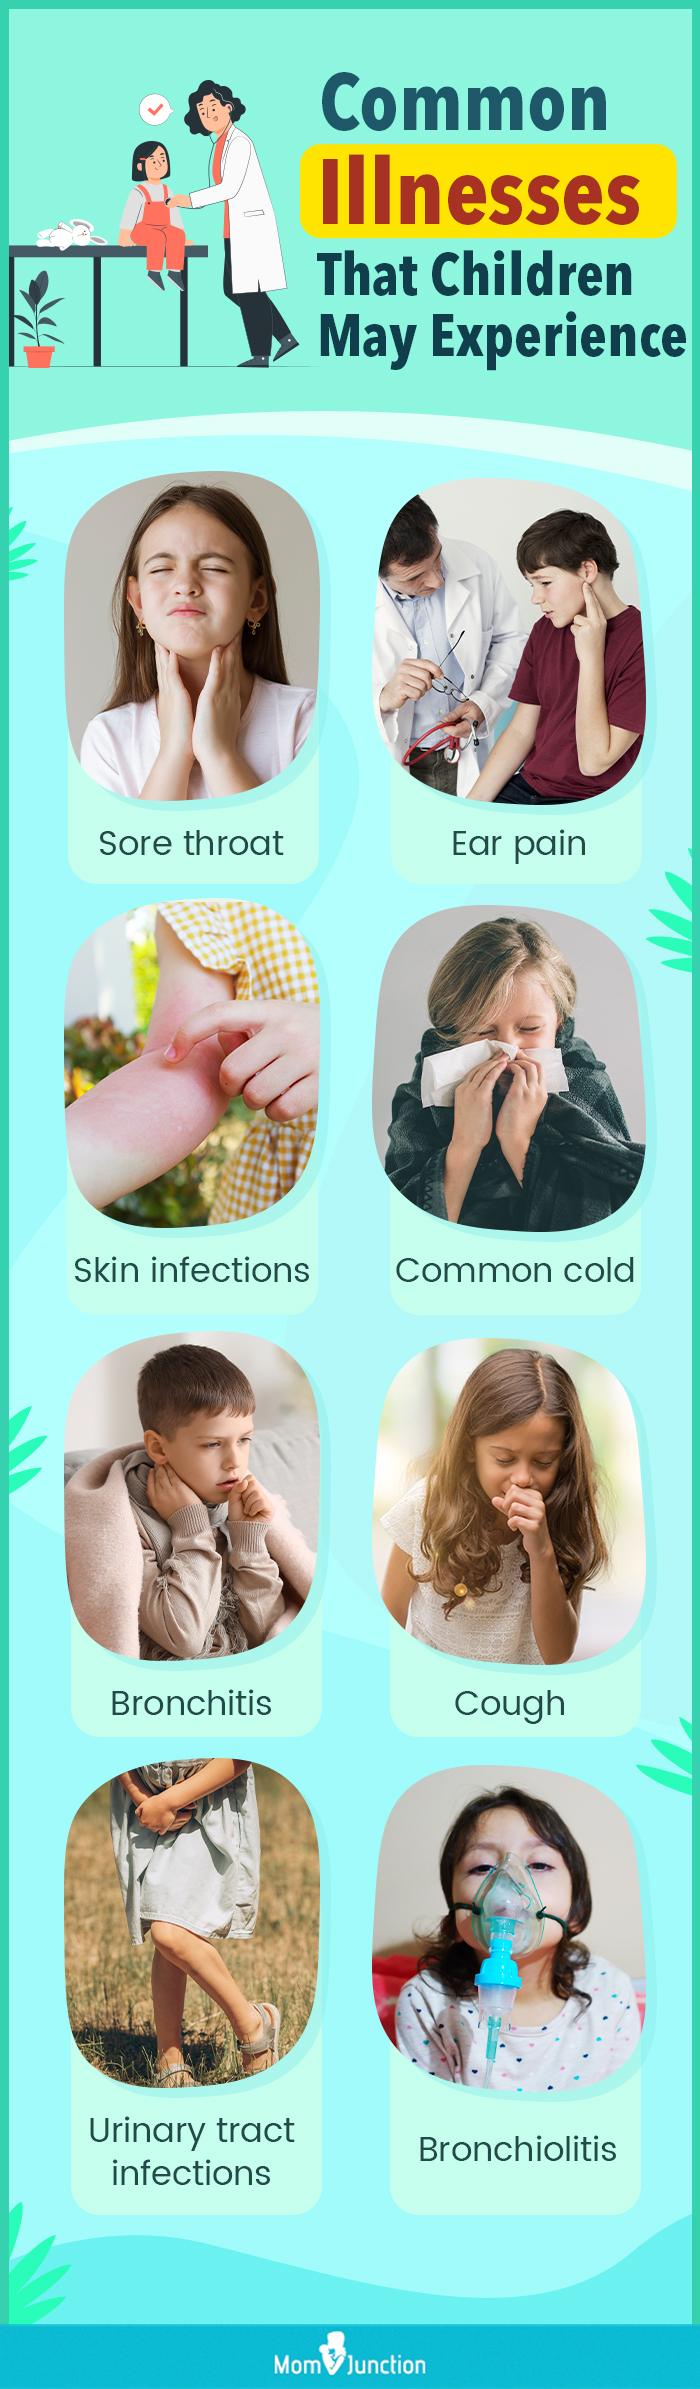 common illnesses that children may experience (infographic)